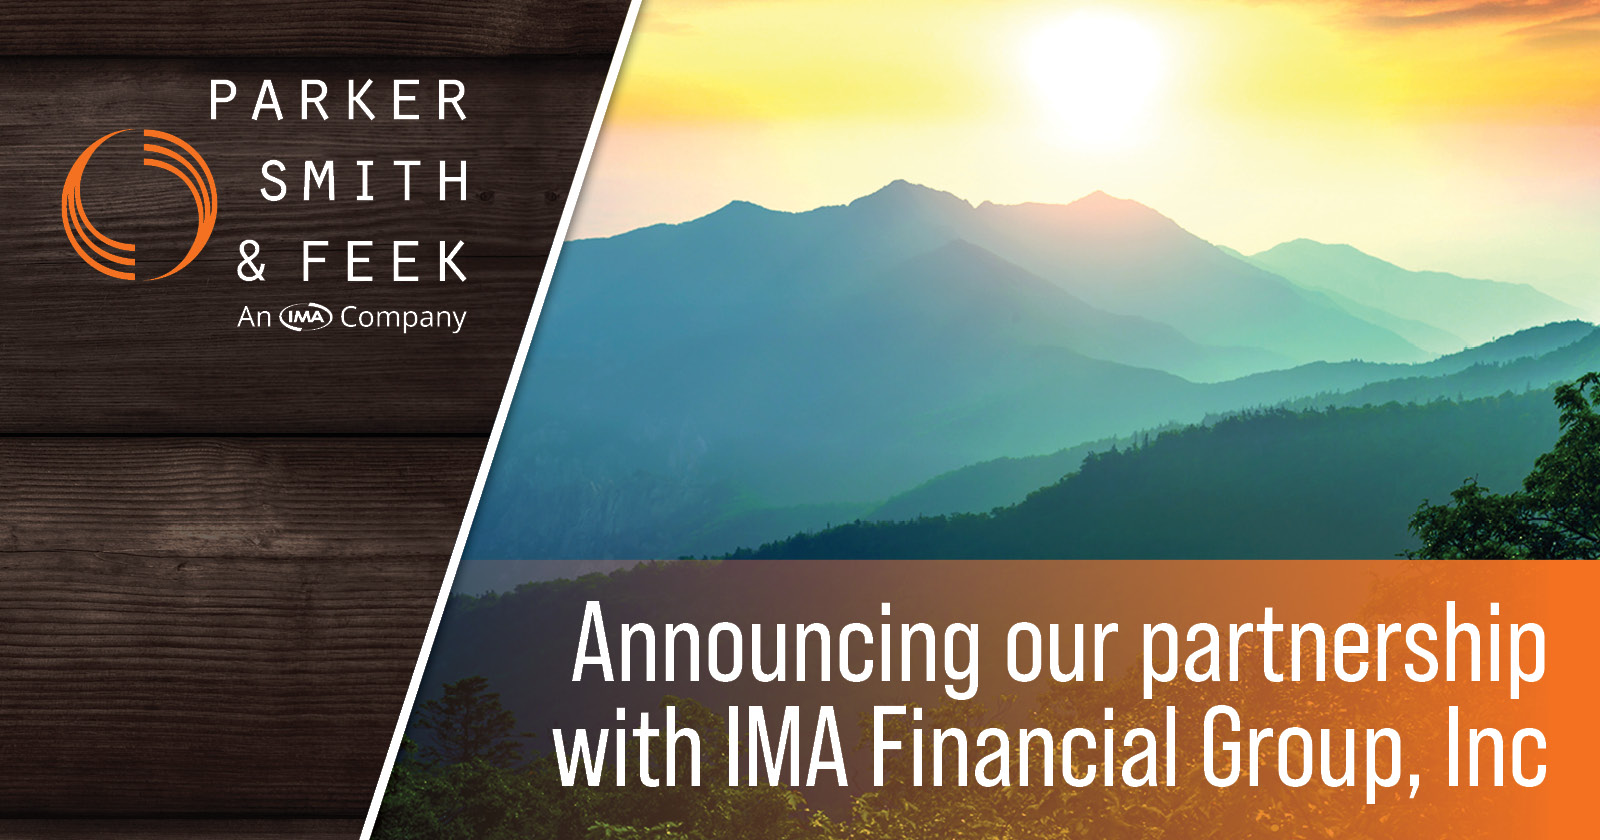 Parker, Smith & Feek partners with IMA Financial Group